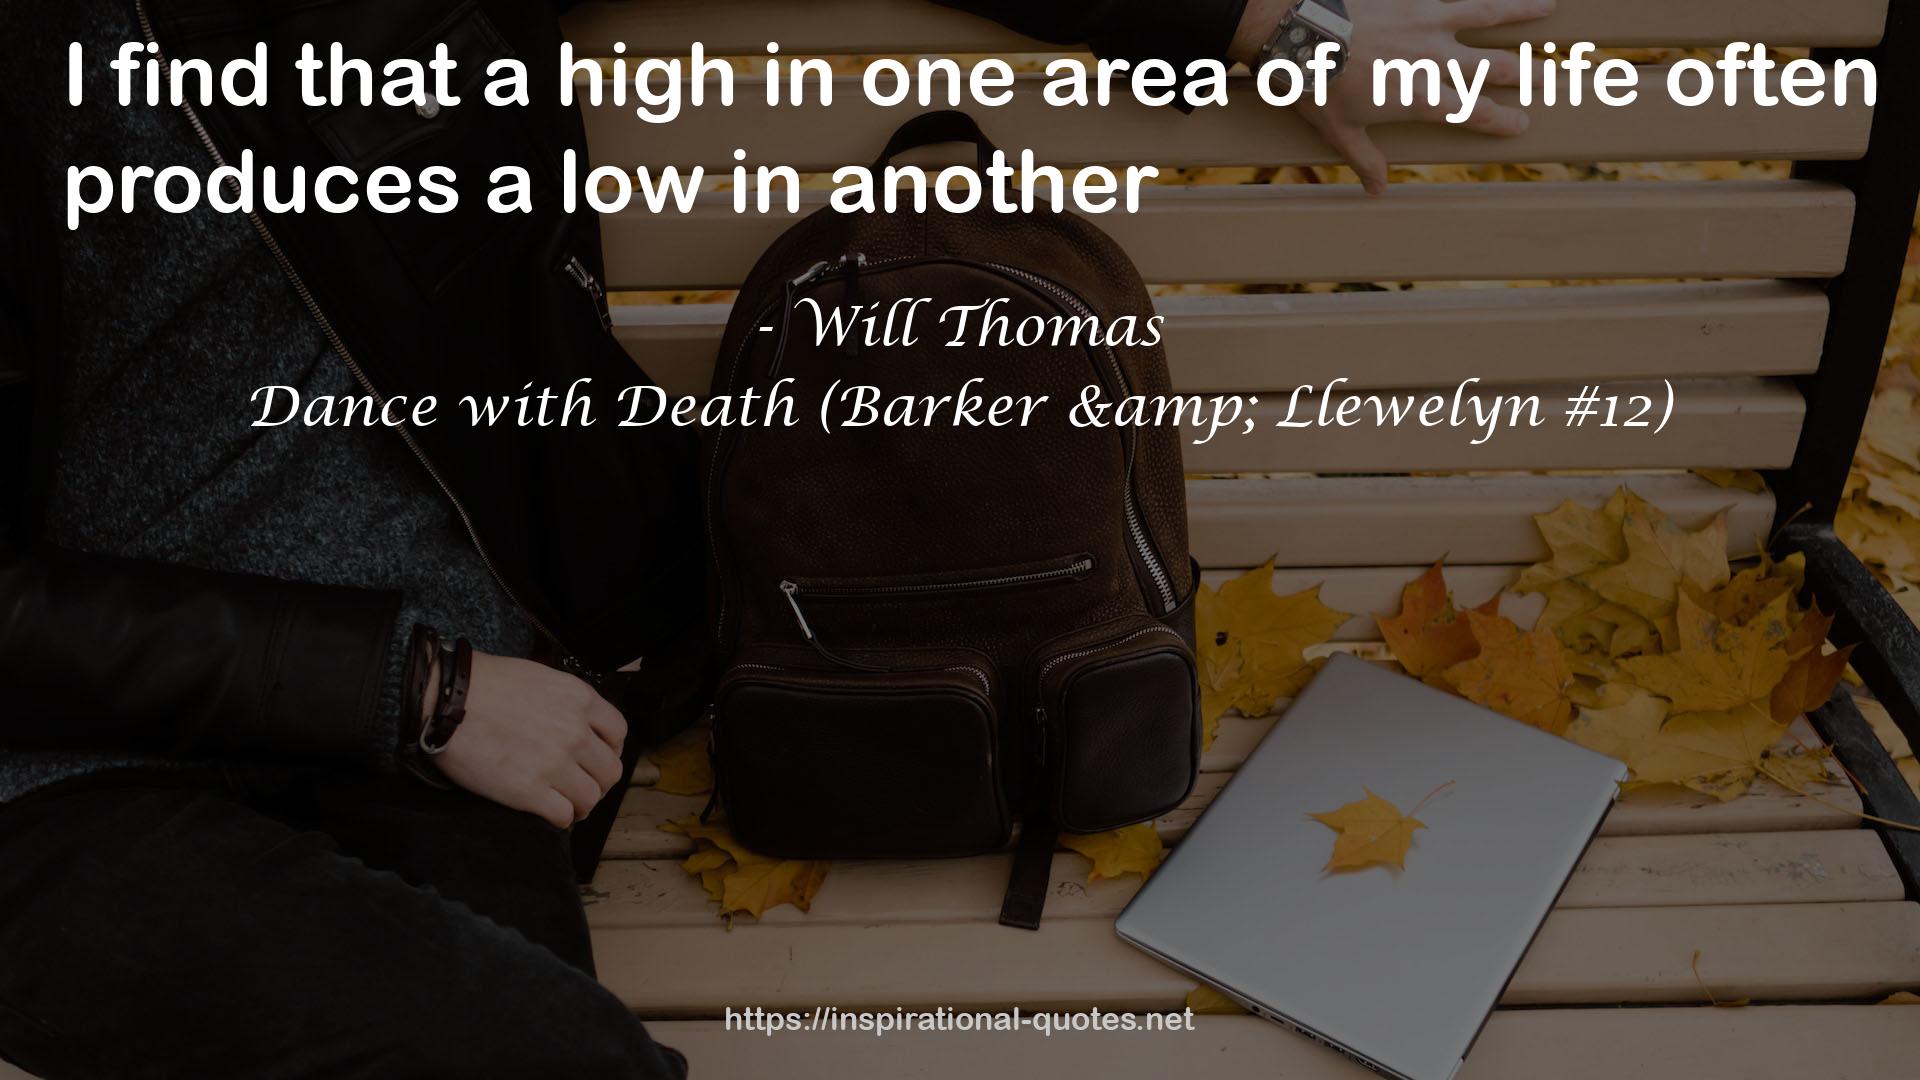 Dance with Death (Barker & Llewelyn #12) QUOTES